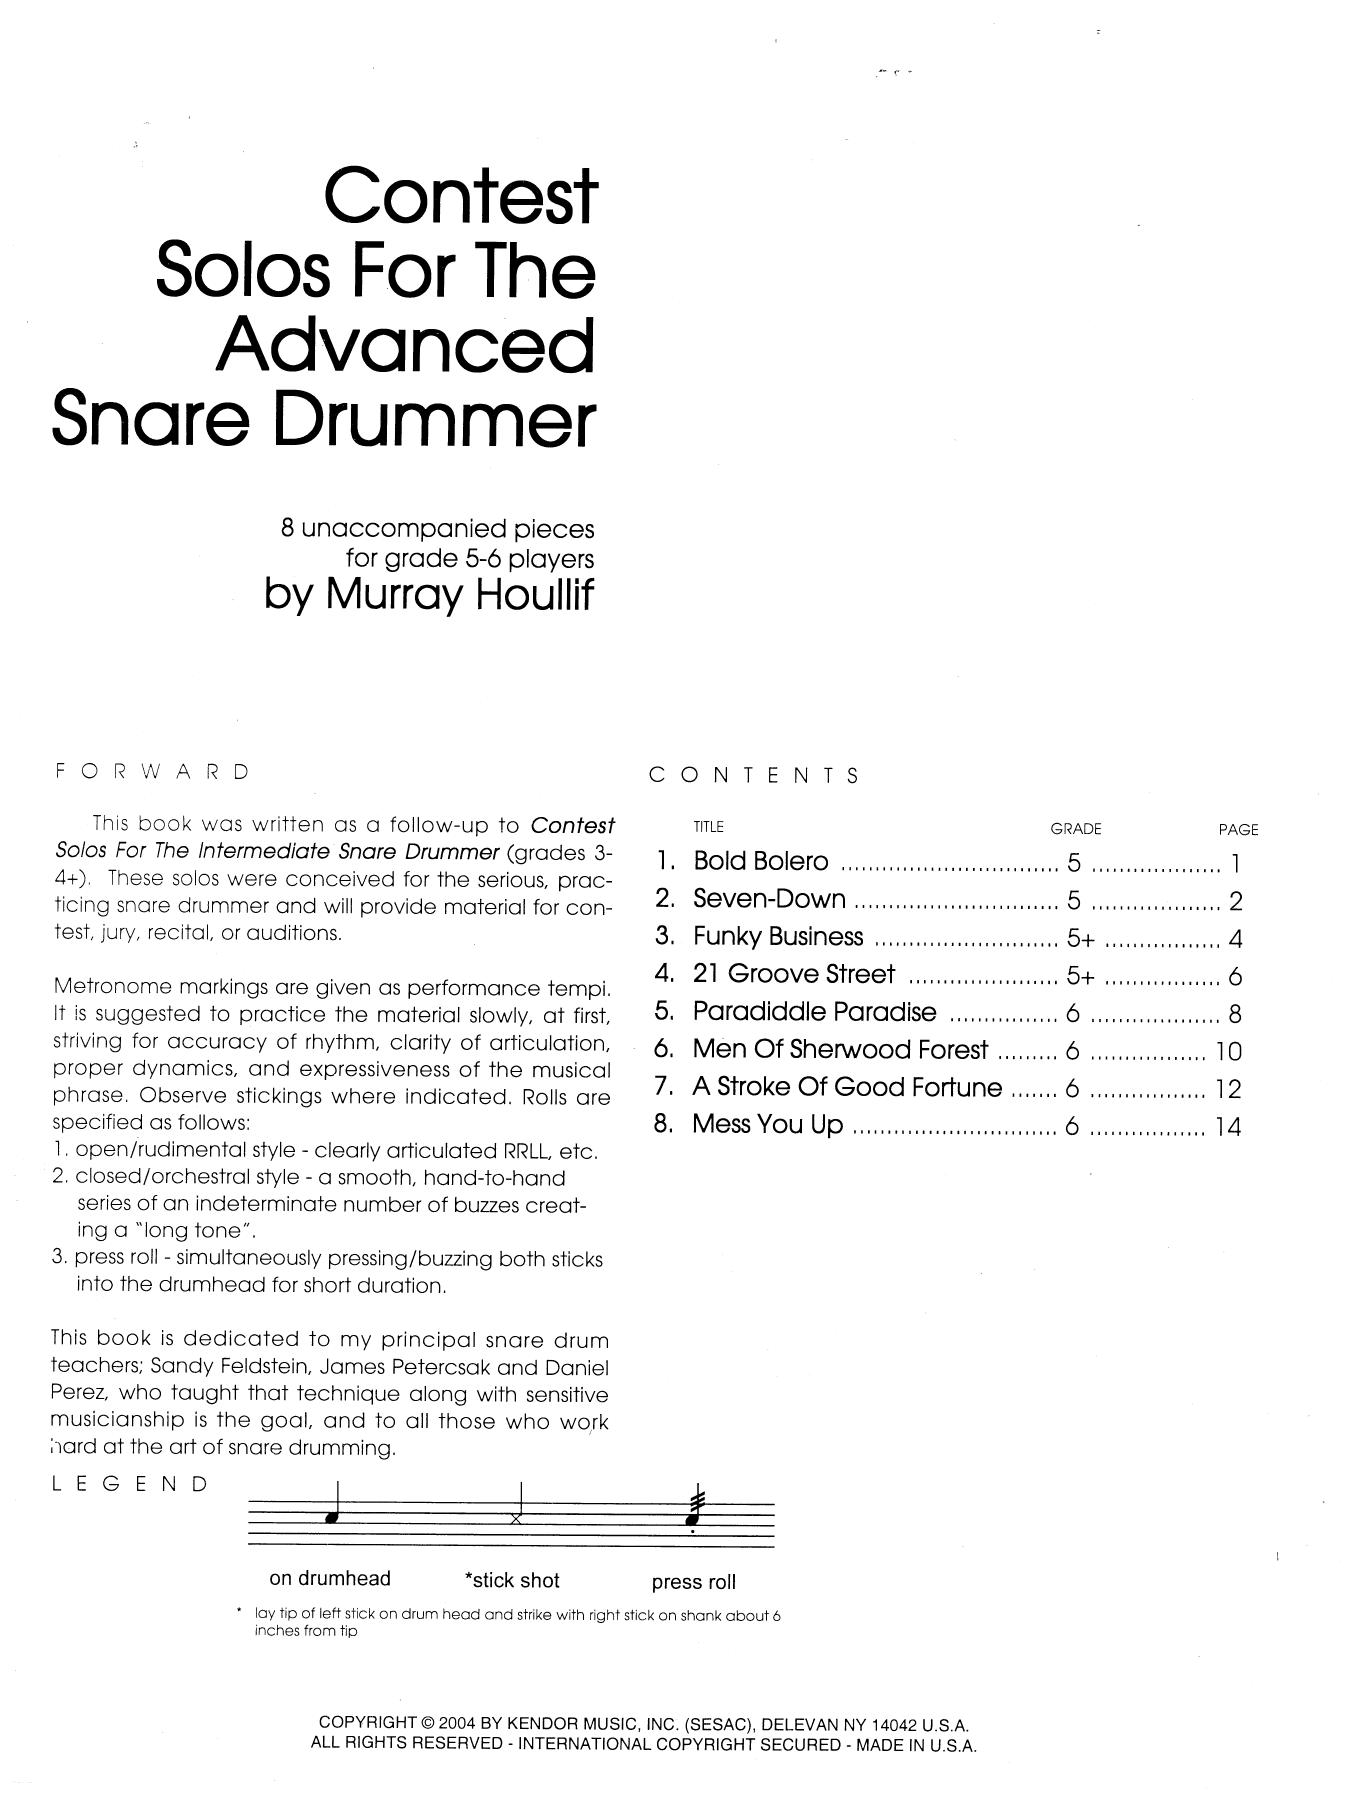 Contest Solos For The Advanced Snare Drummer (Percussion Solo) von Murray Houllif